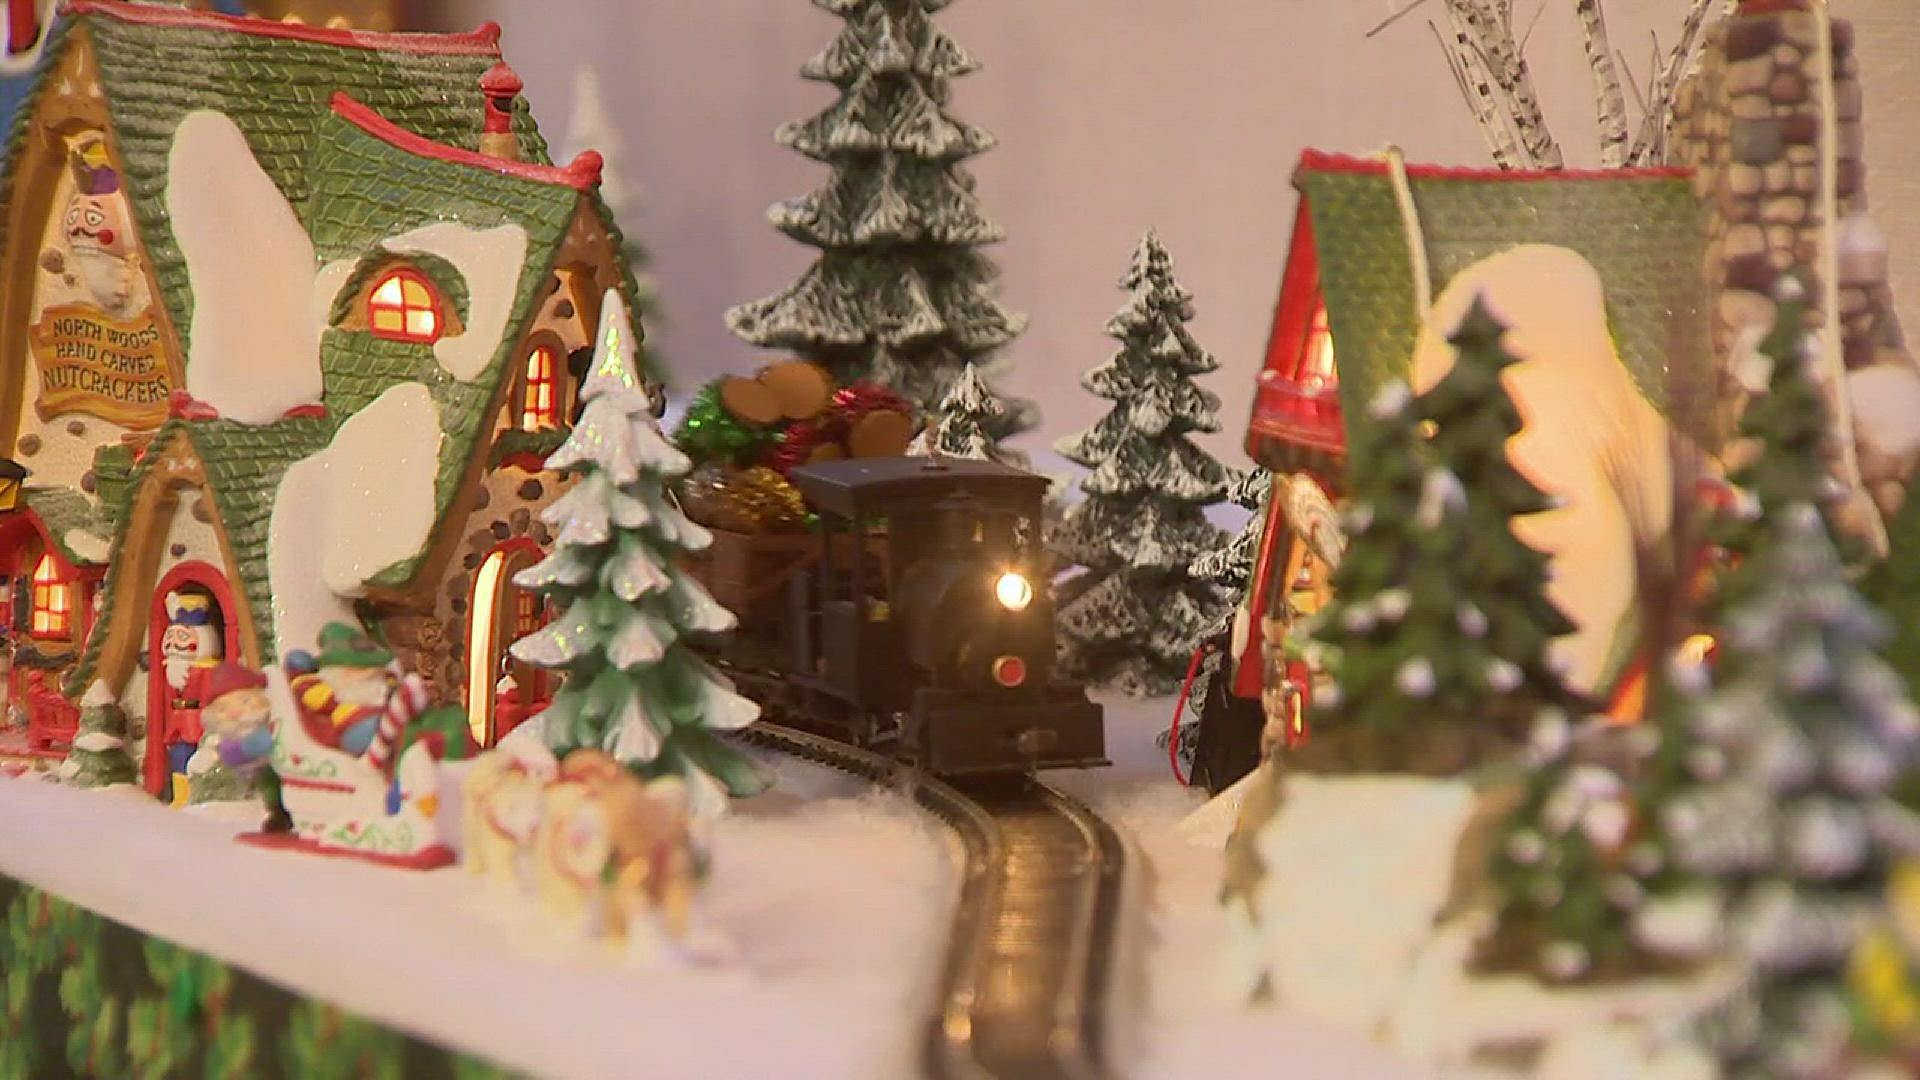 An Arvada man spent nearly thirty years building this giant display for his family to enjoy for the holidays.